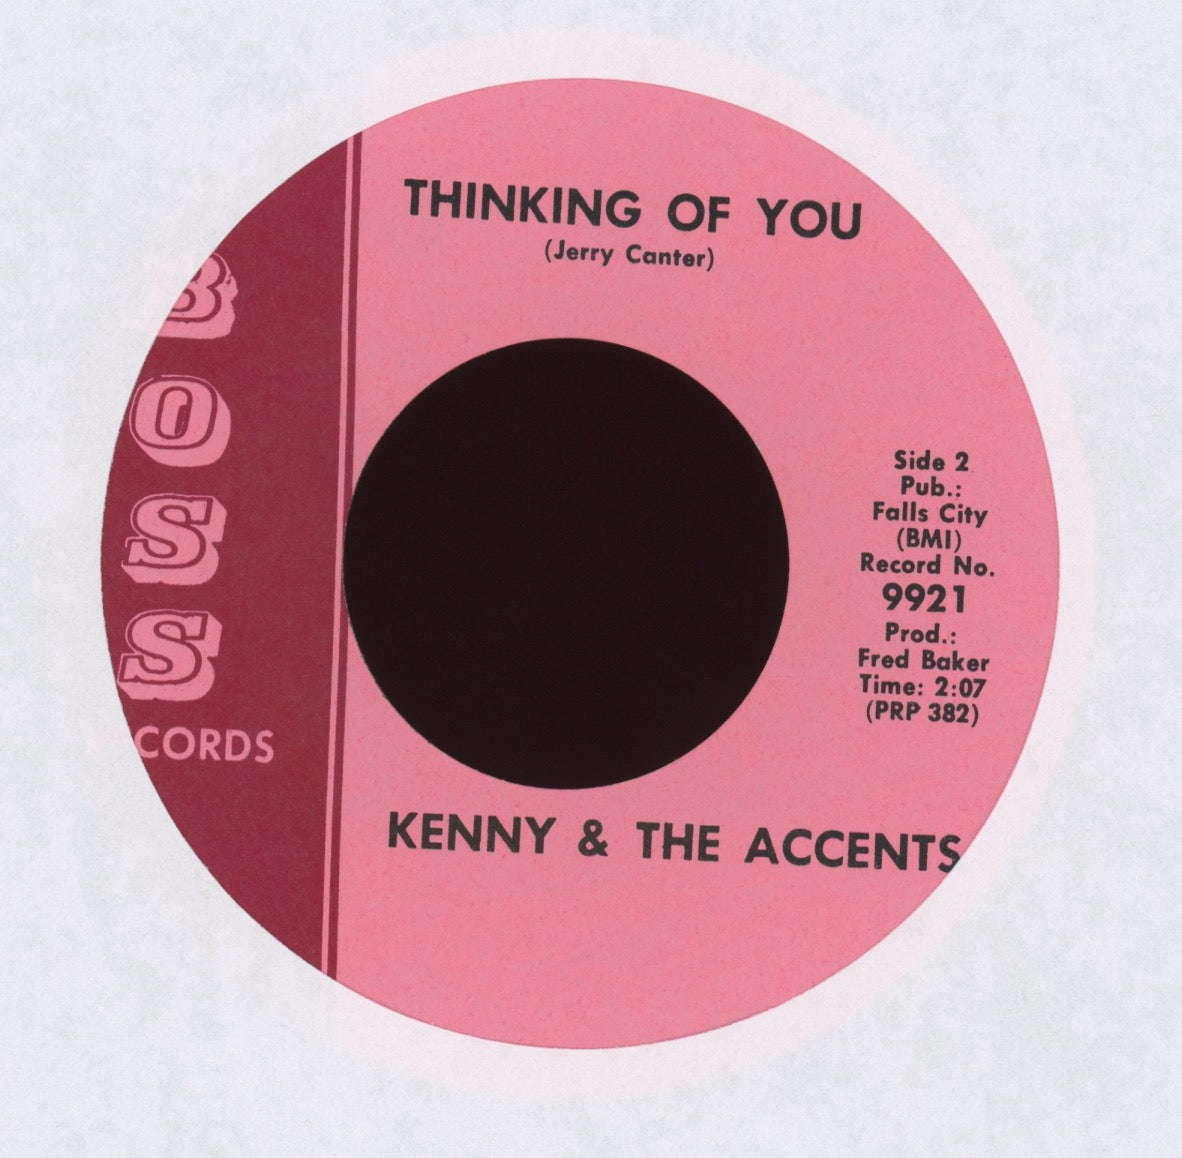 Kenny & The Accent Revue - Good Soul Lovin' on Boss